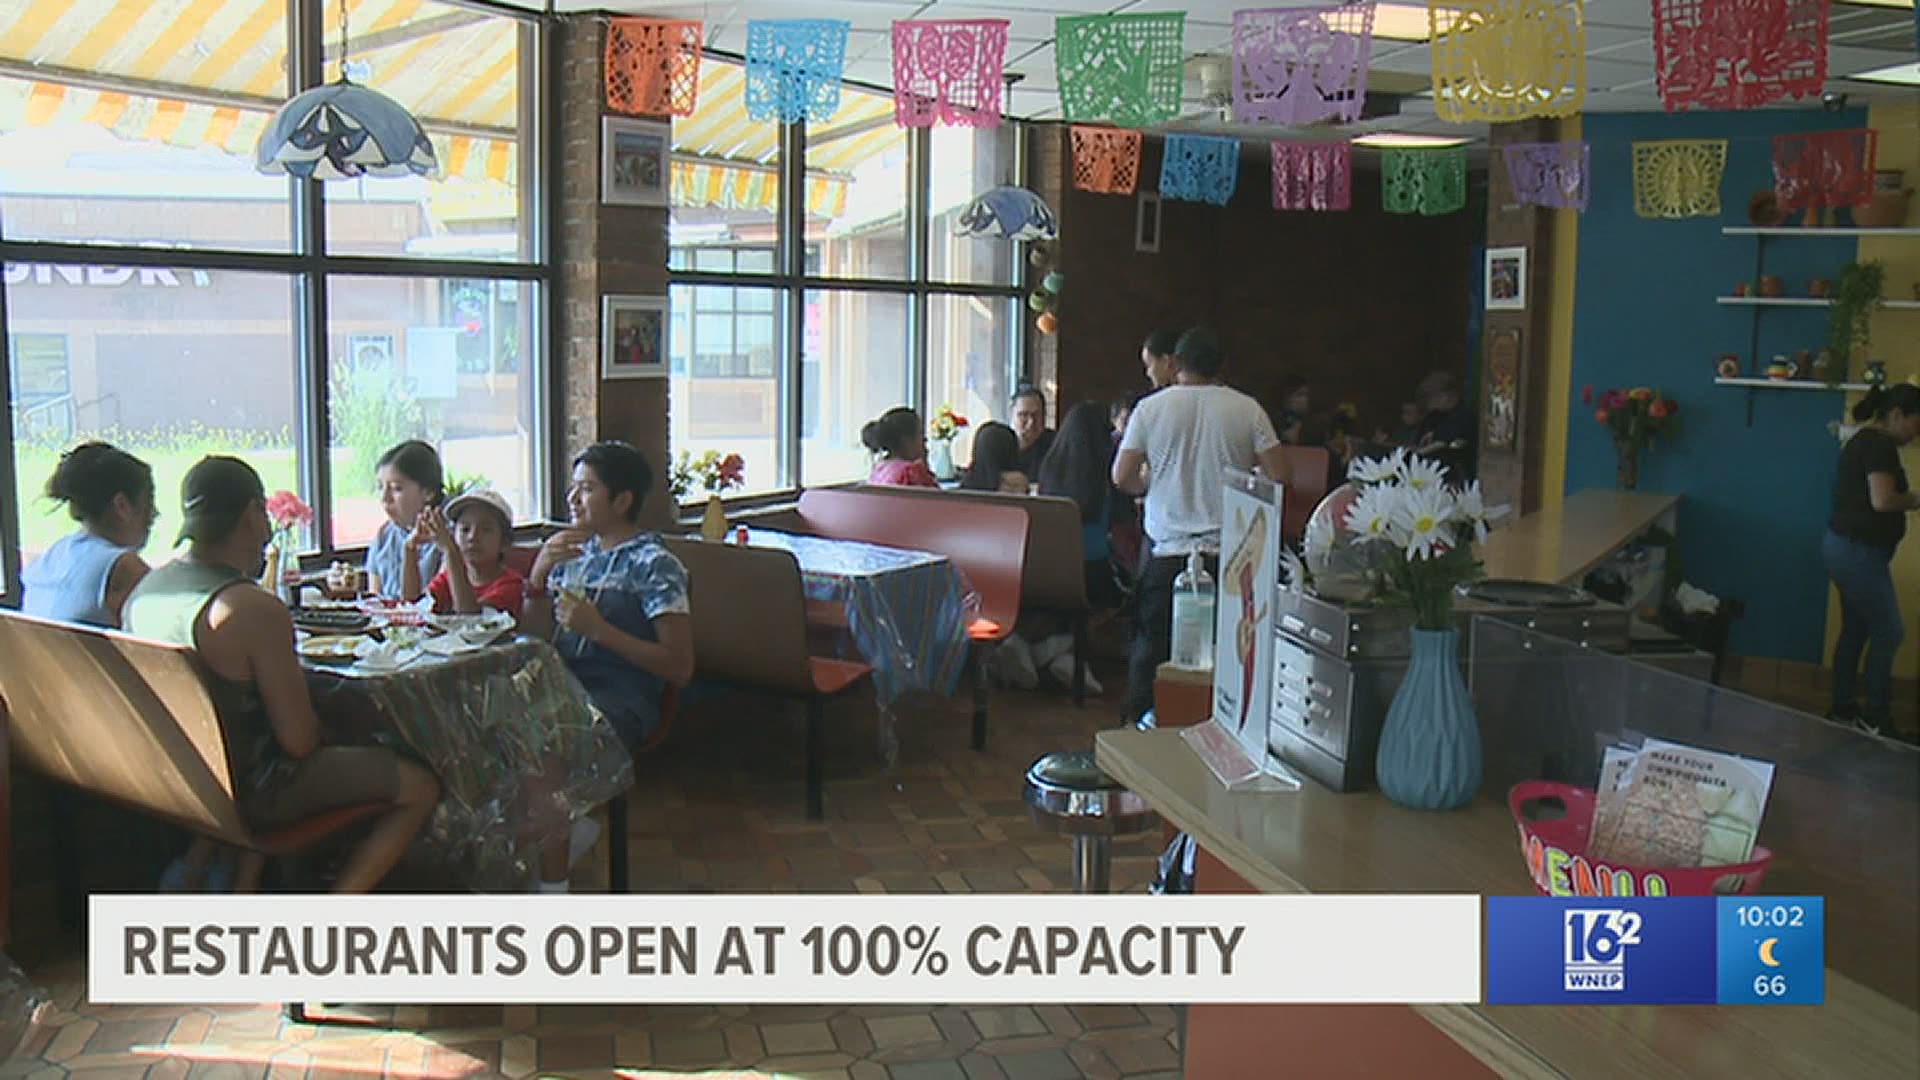 Picosita Tacos waited until the state allowed restaurants to have customers inside at 100% capacity to have its grand opening